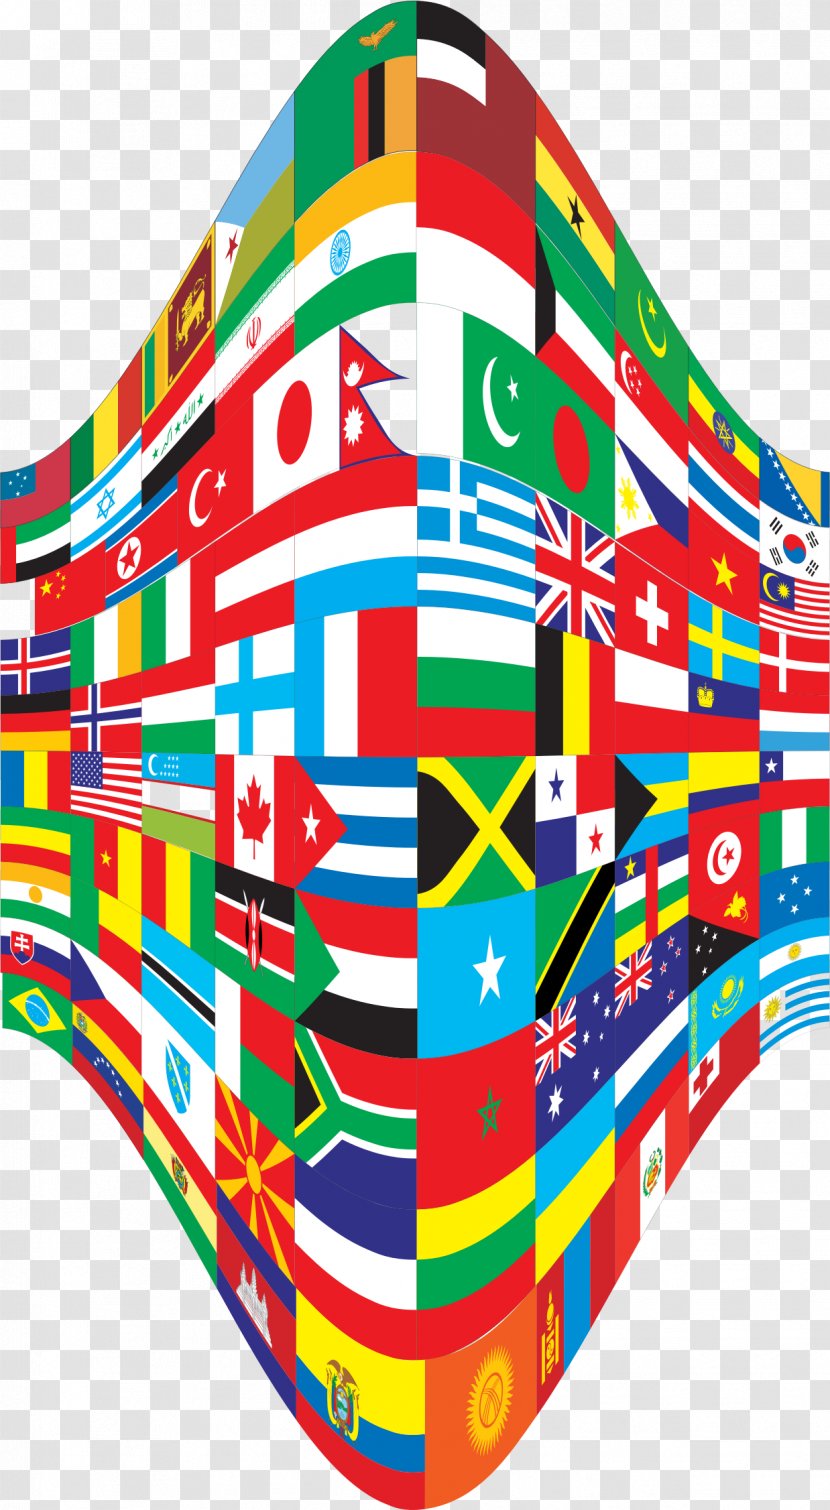 Flags Of The World Perspective Clip Art - Royaltyfree Transparent PNG